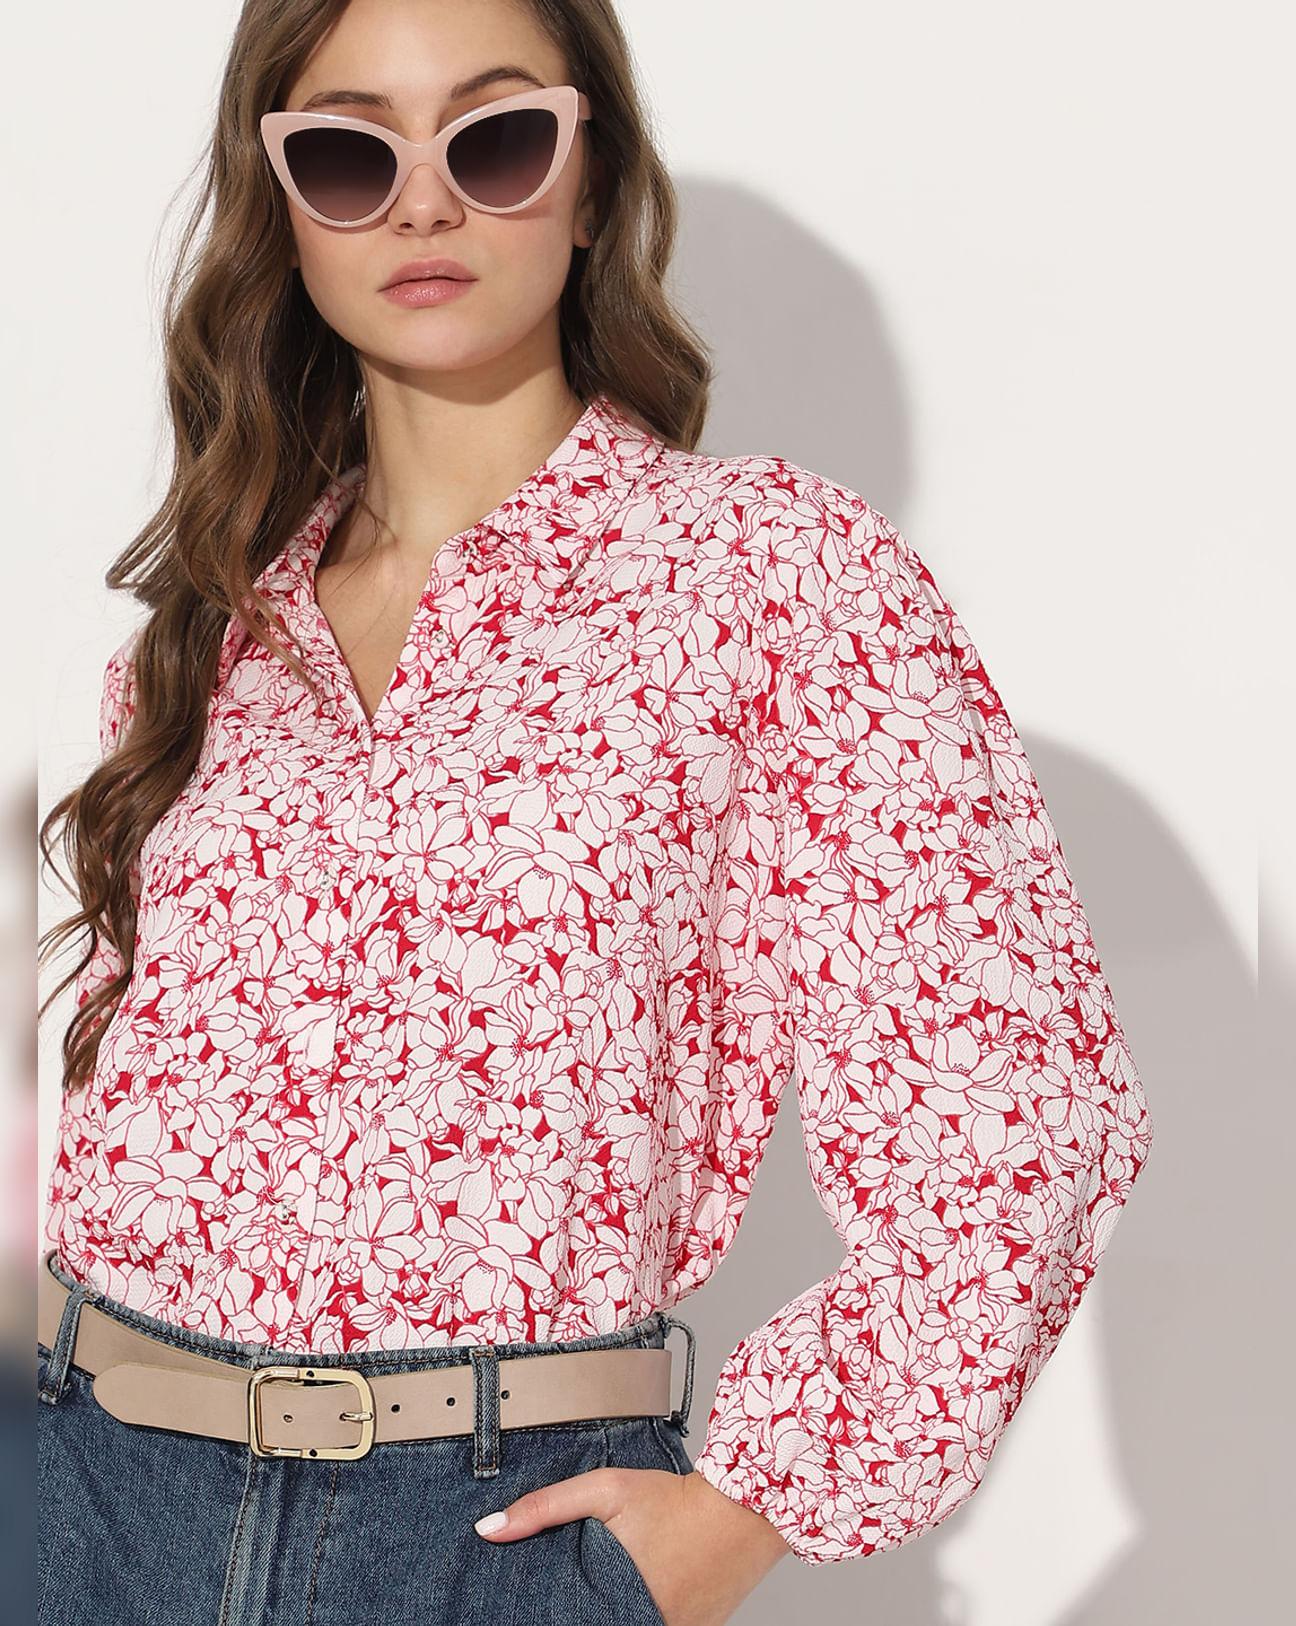 white-&-red-floral-shirt